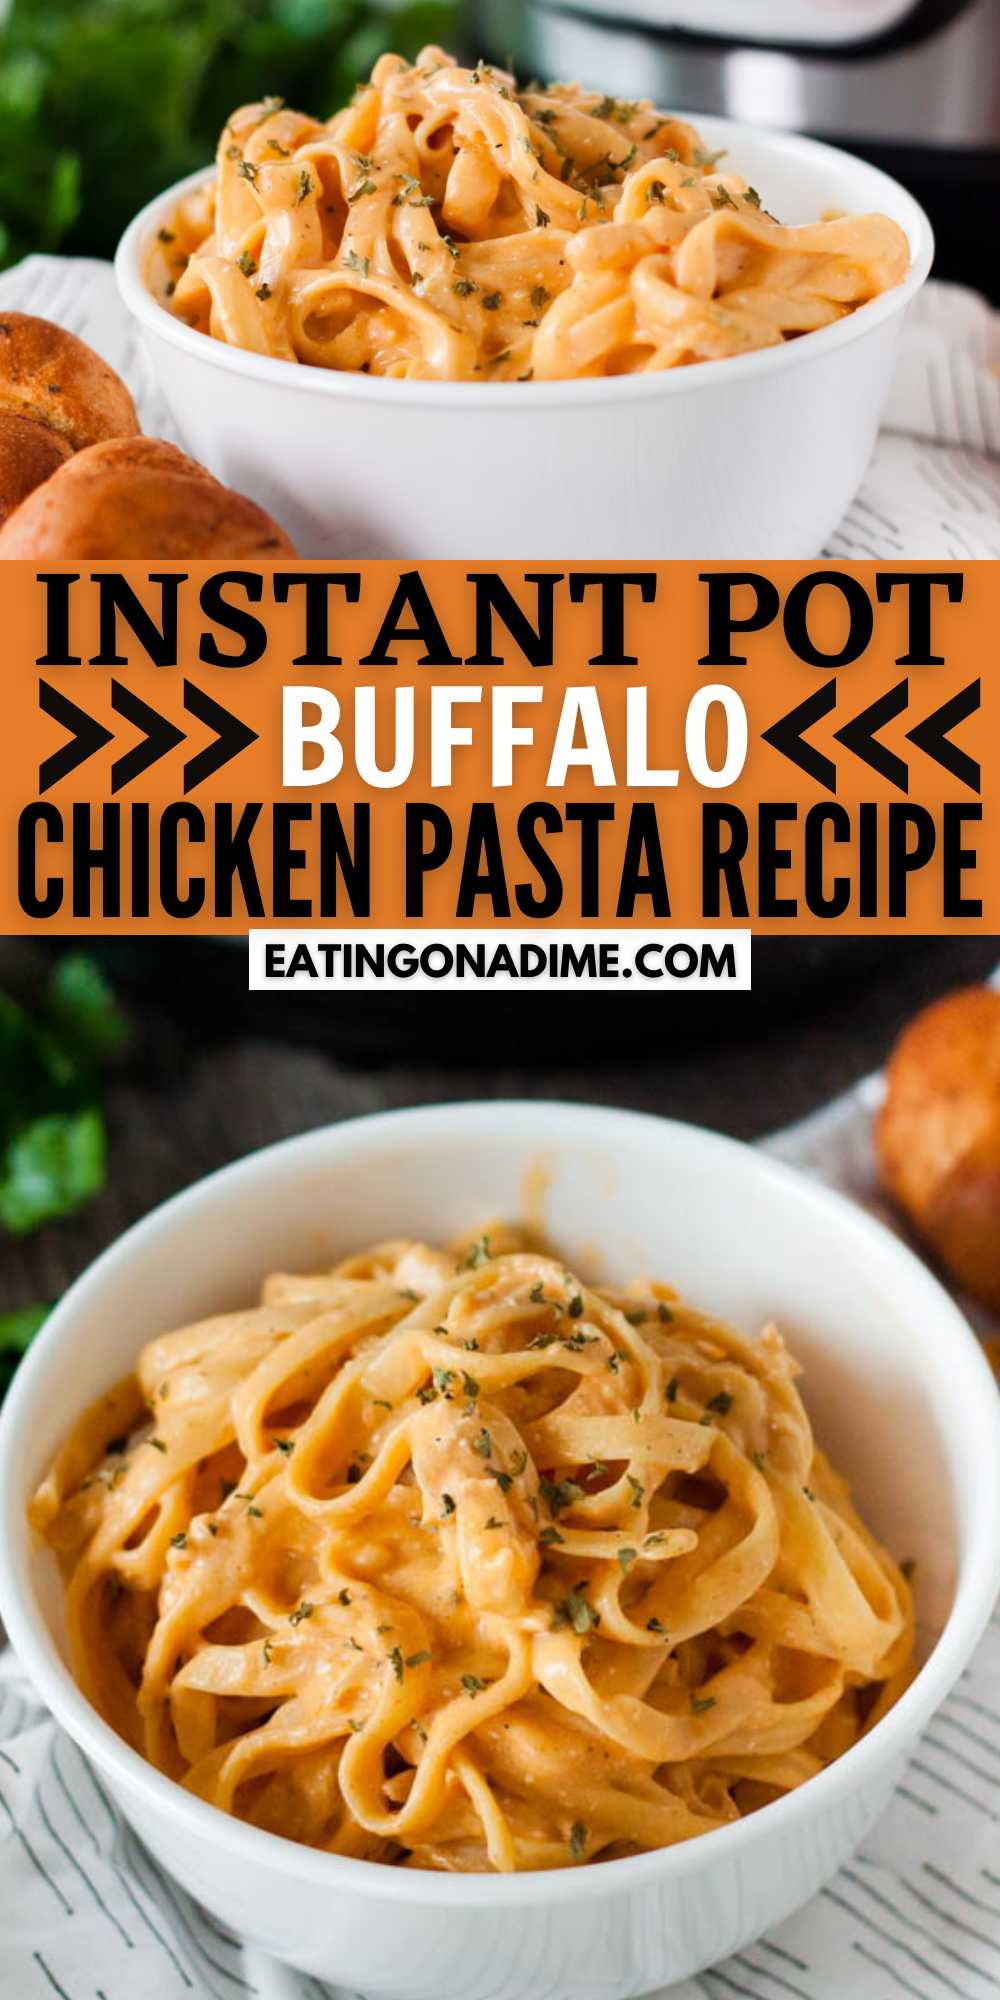 Easy instant pot buffalo chicken pasta recipe. Everything cooks in the pressure cooker so this is a great one pot meal.  The buffalo sauce and cream cheese mixed together makes a perfect sauce for this dish that everyone will love. #eatingonadime #instantpotbuffalochickenpasta #buffalochickenpastarecipe #instantpotrecipes